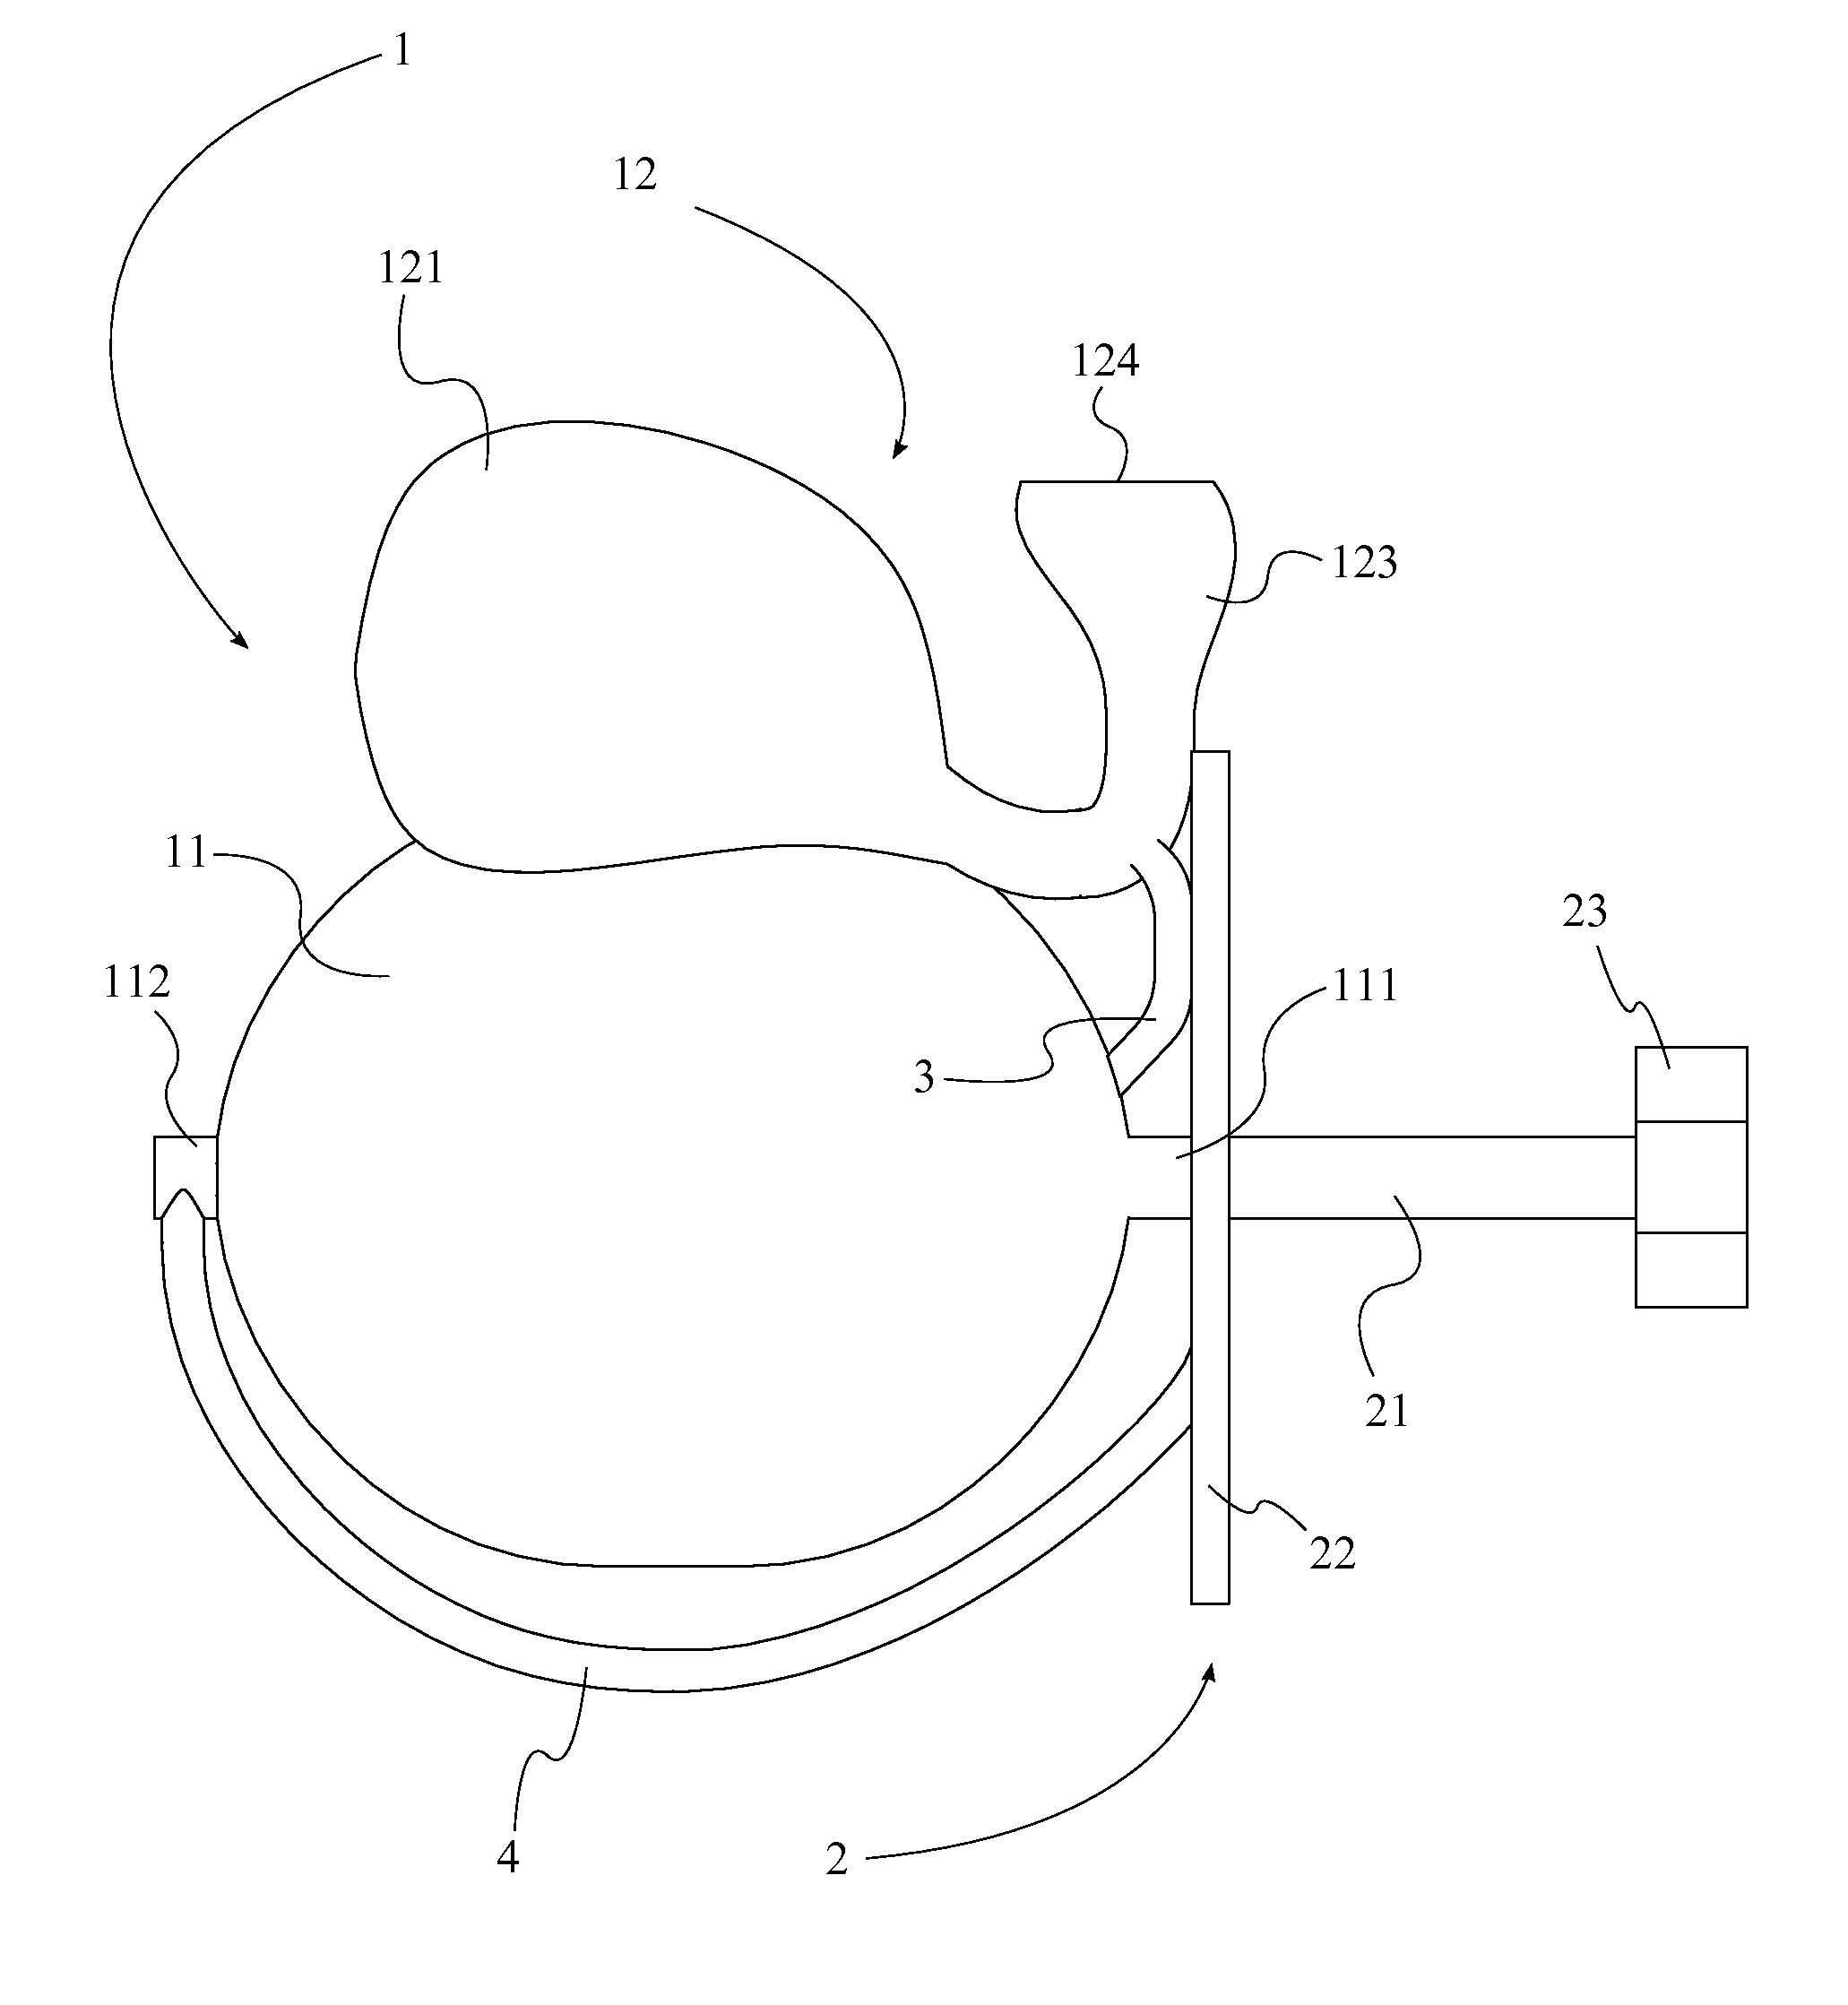 Training Device for Treating Snoring and Apnea